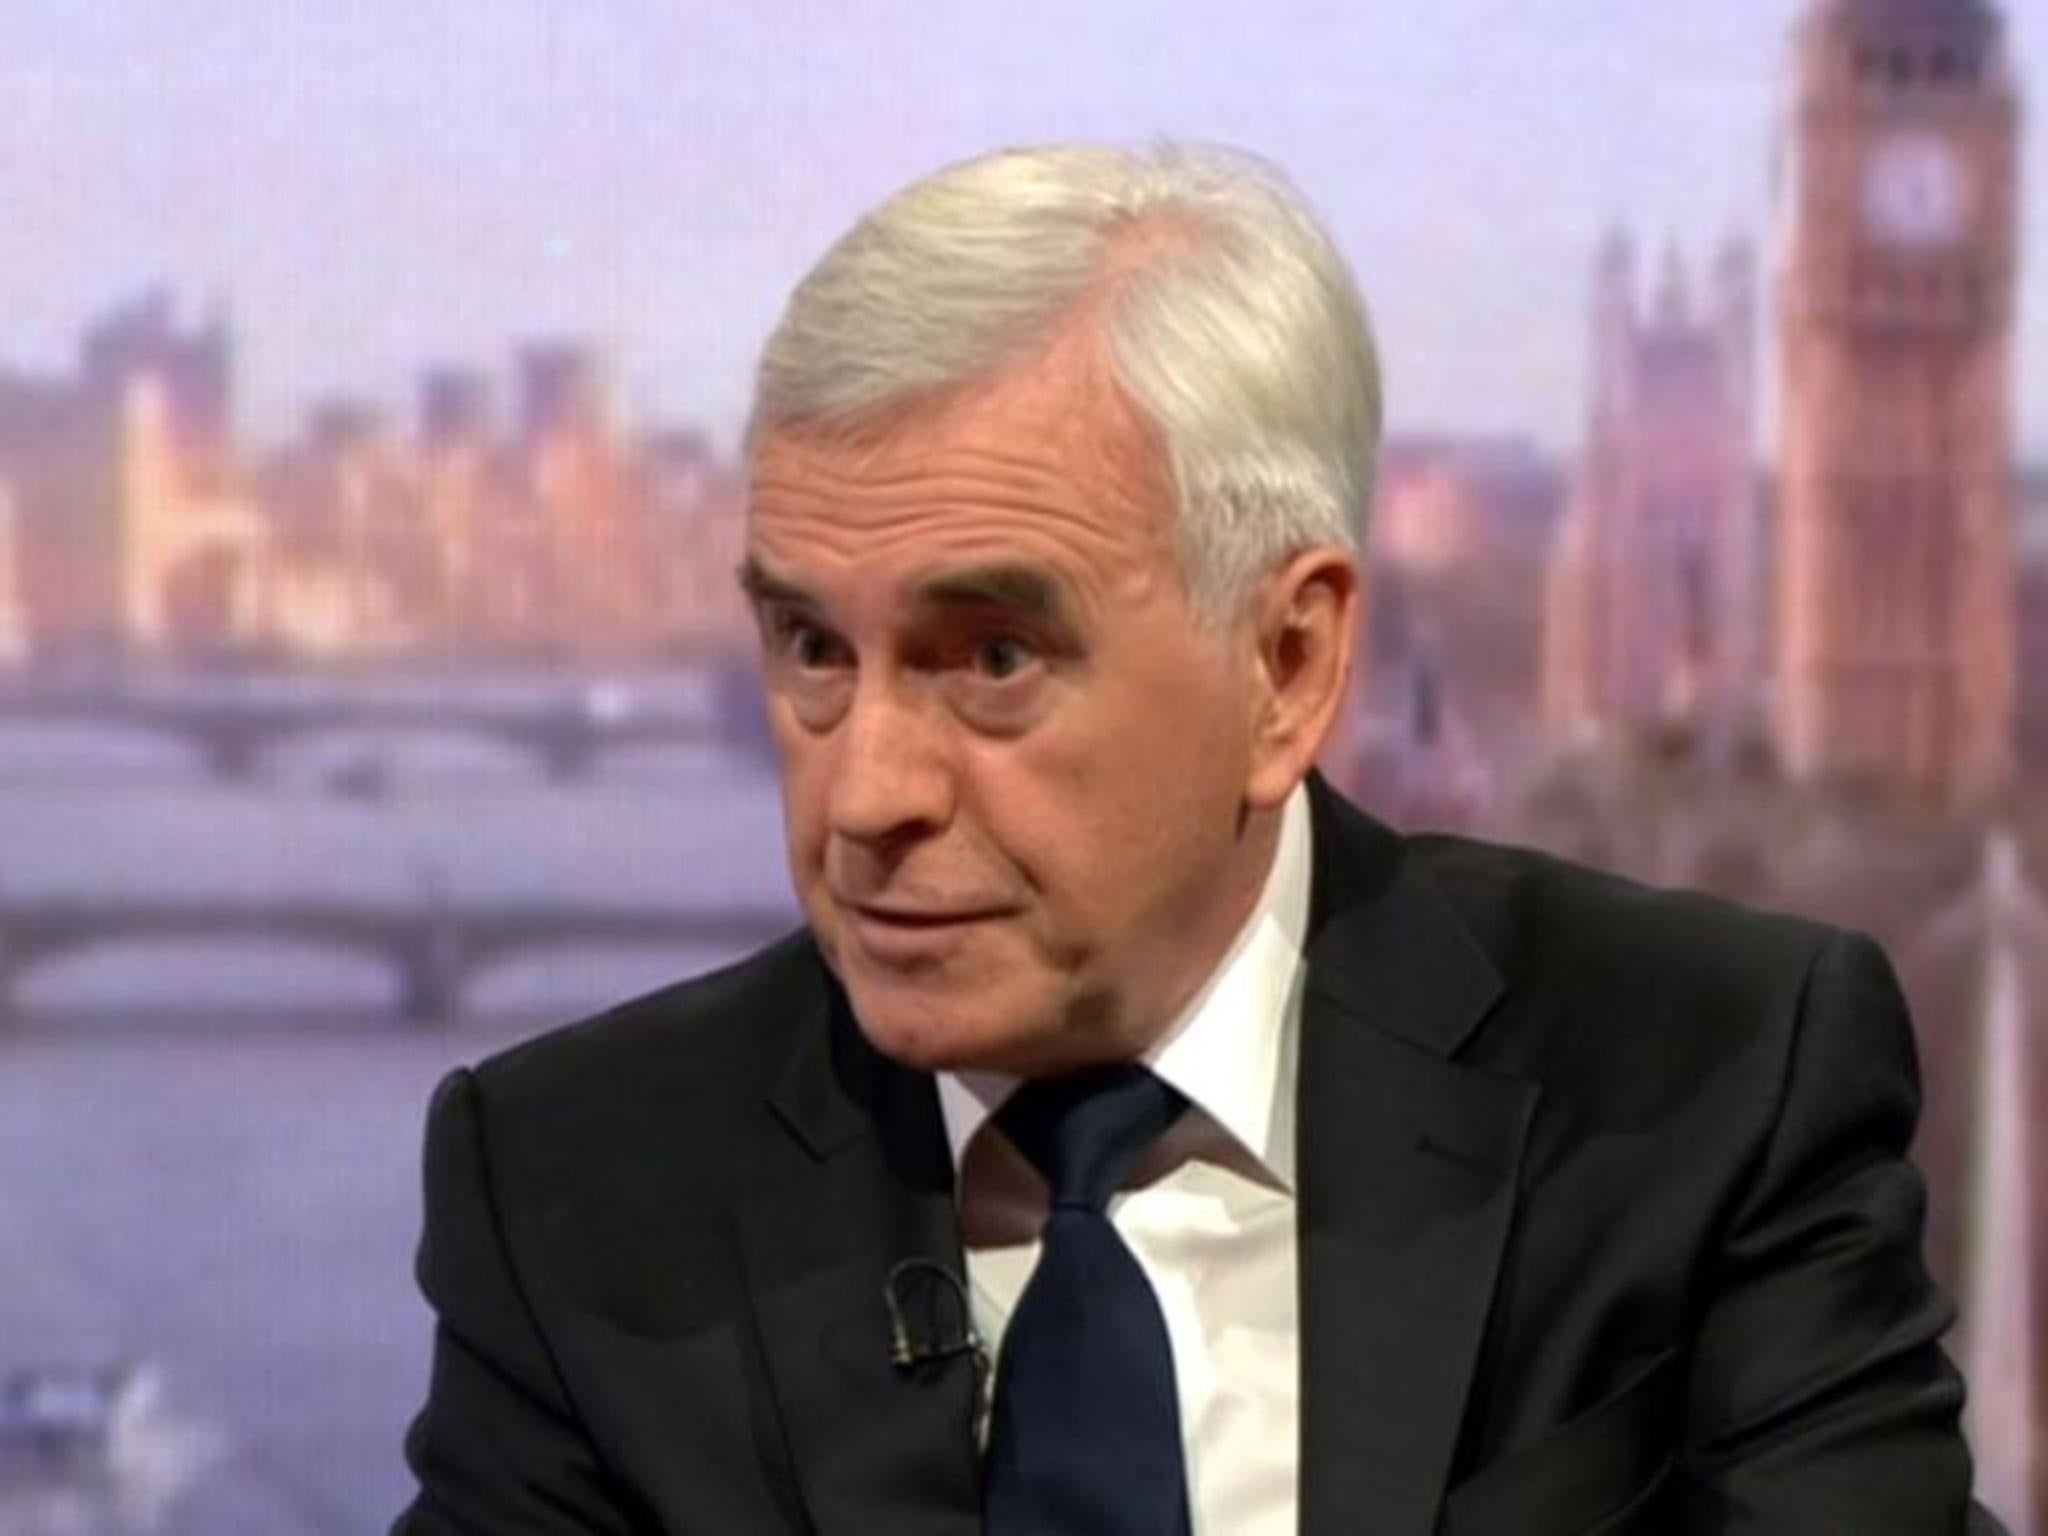 The Bank of England could be moved to Birmingham if John McDonnell becomes Chancellor